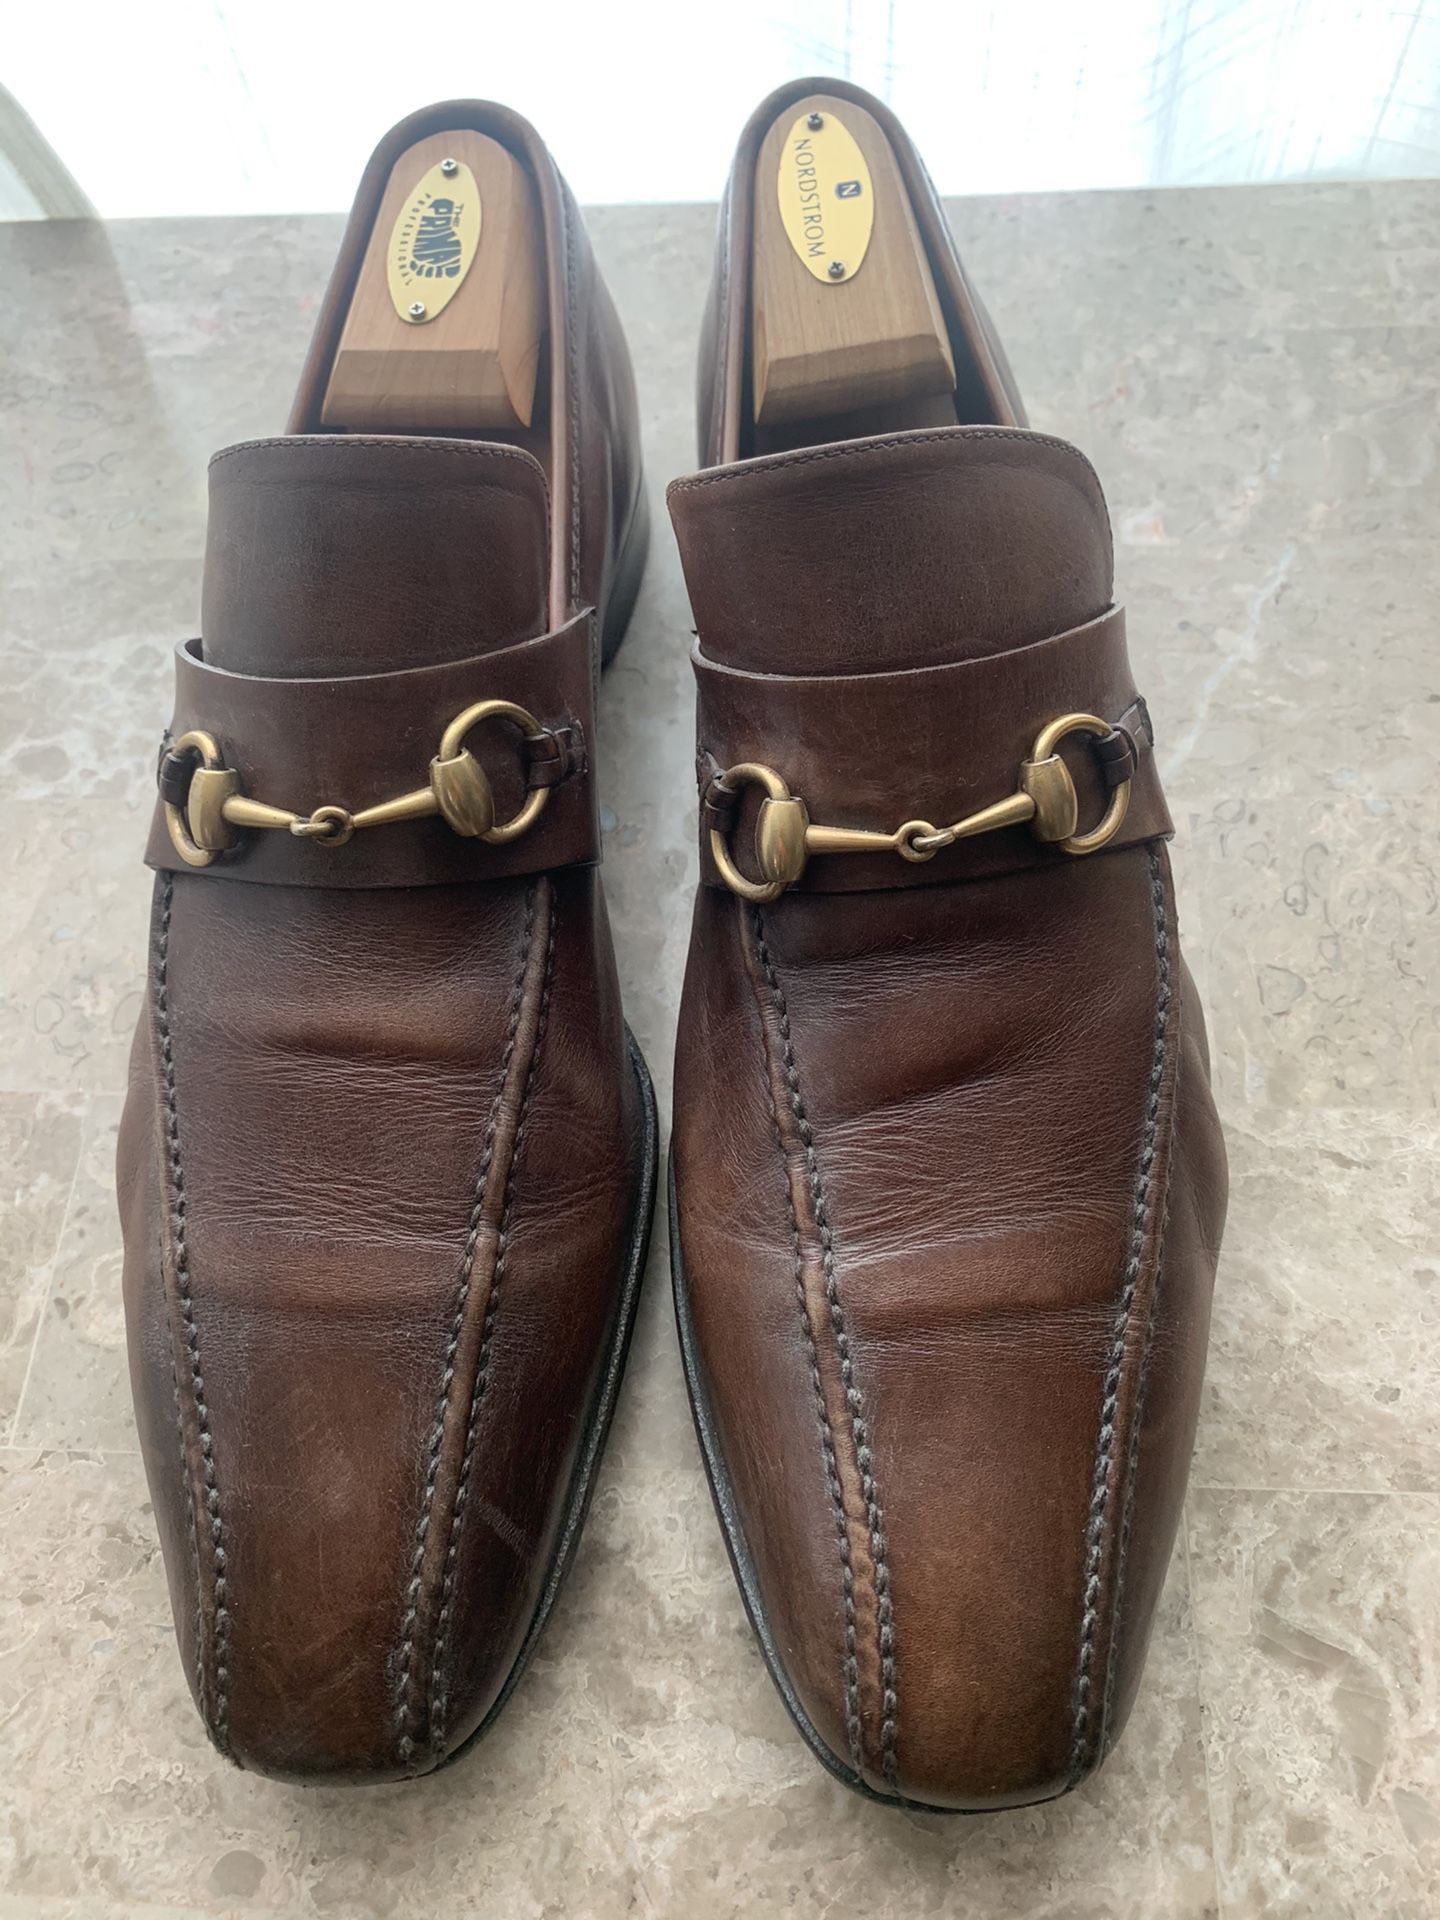 Gucci men’s loafers 11 D